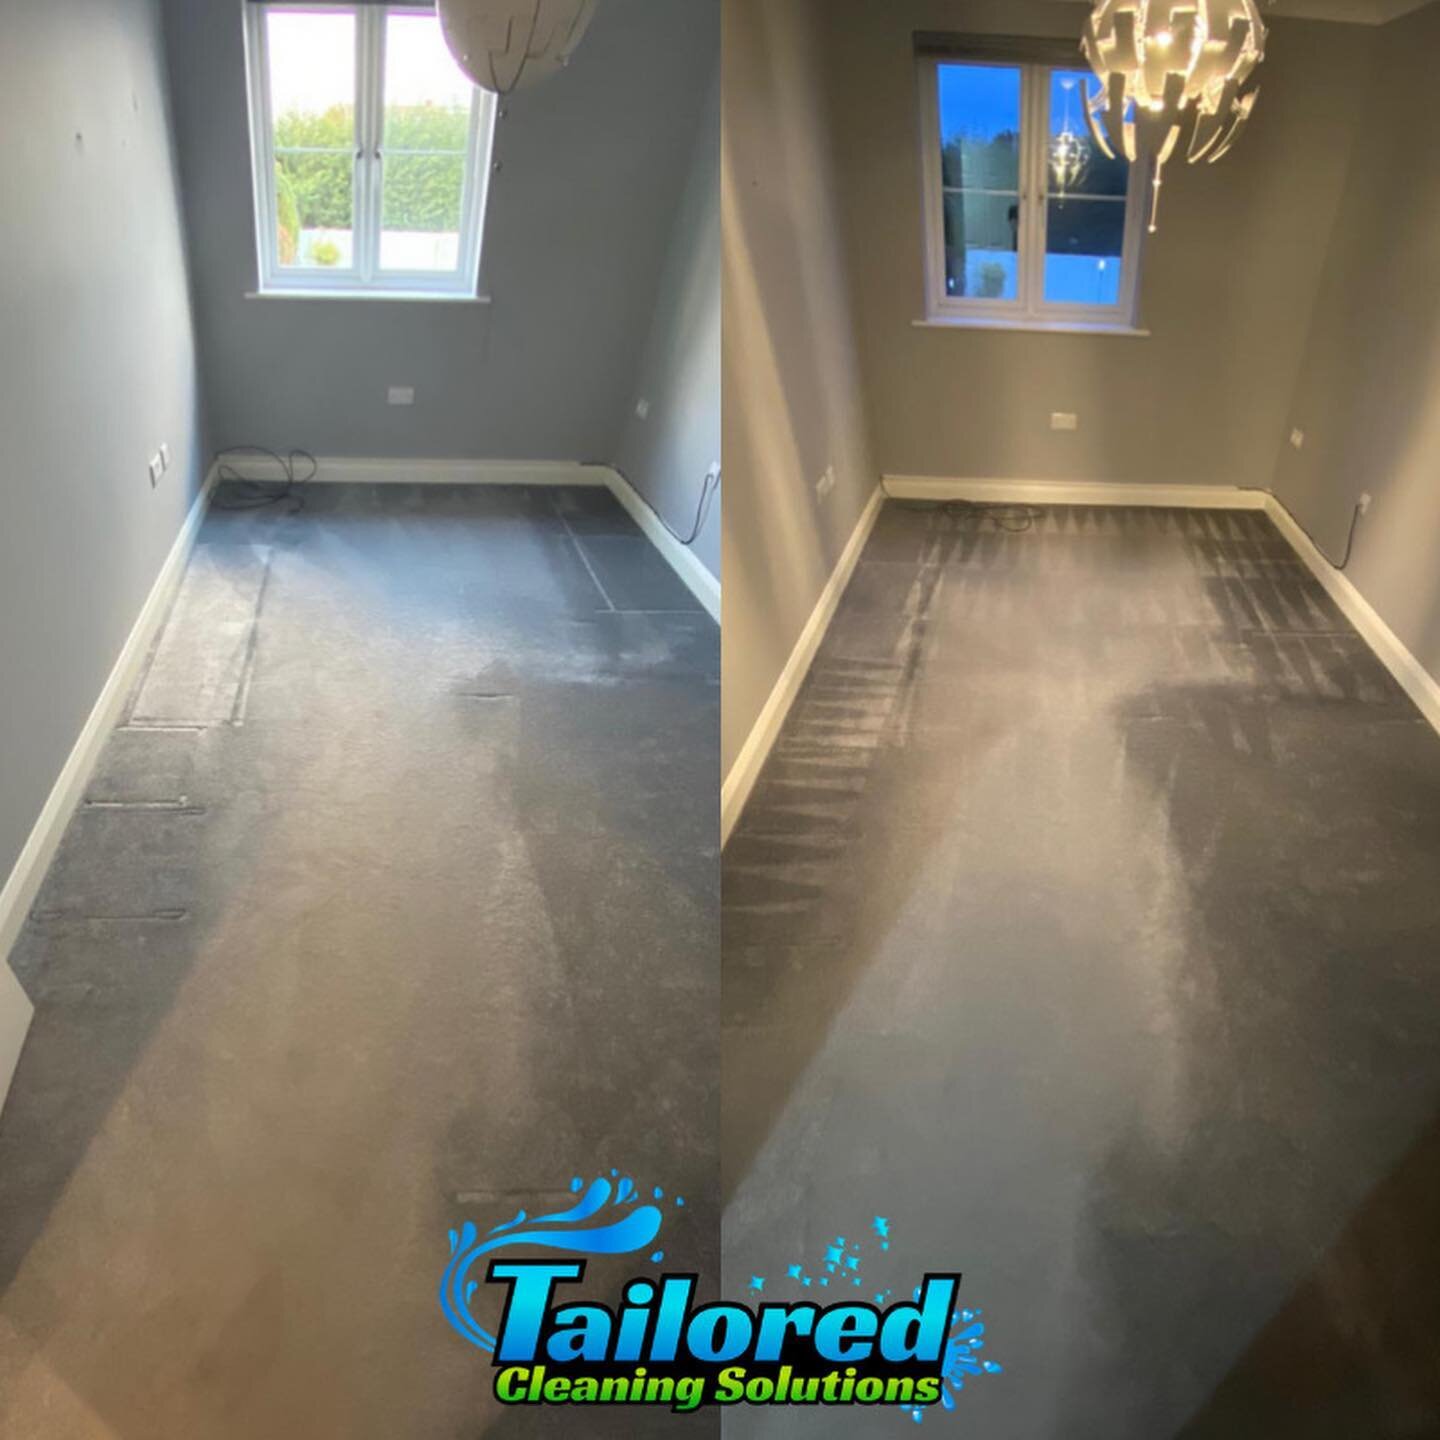 Check out the results from our recent job, we left those carpets looking spotless! 🤷&zwj;♂️
____________________________________________________

BOOK A SERVICE WITH US 👇🏻⁣
🖥 www.tailoredcleaningsolutions.co.uk
✉️ tailoredcleaning1@gmail.com
📞 0